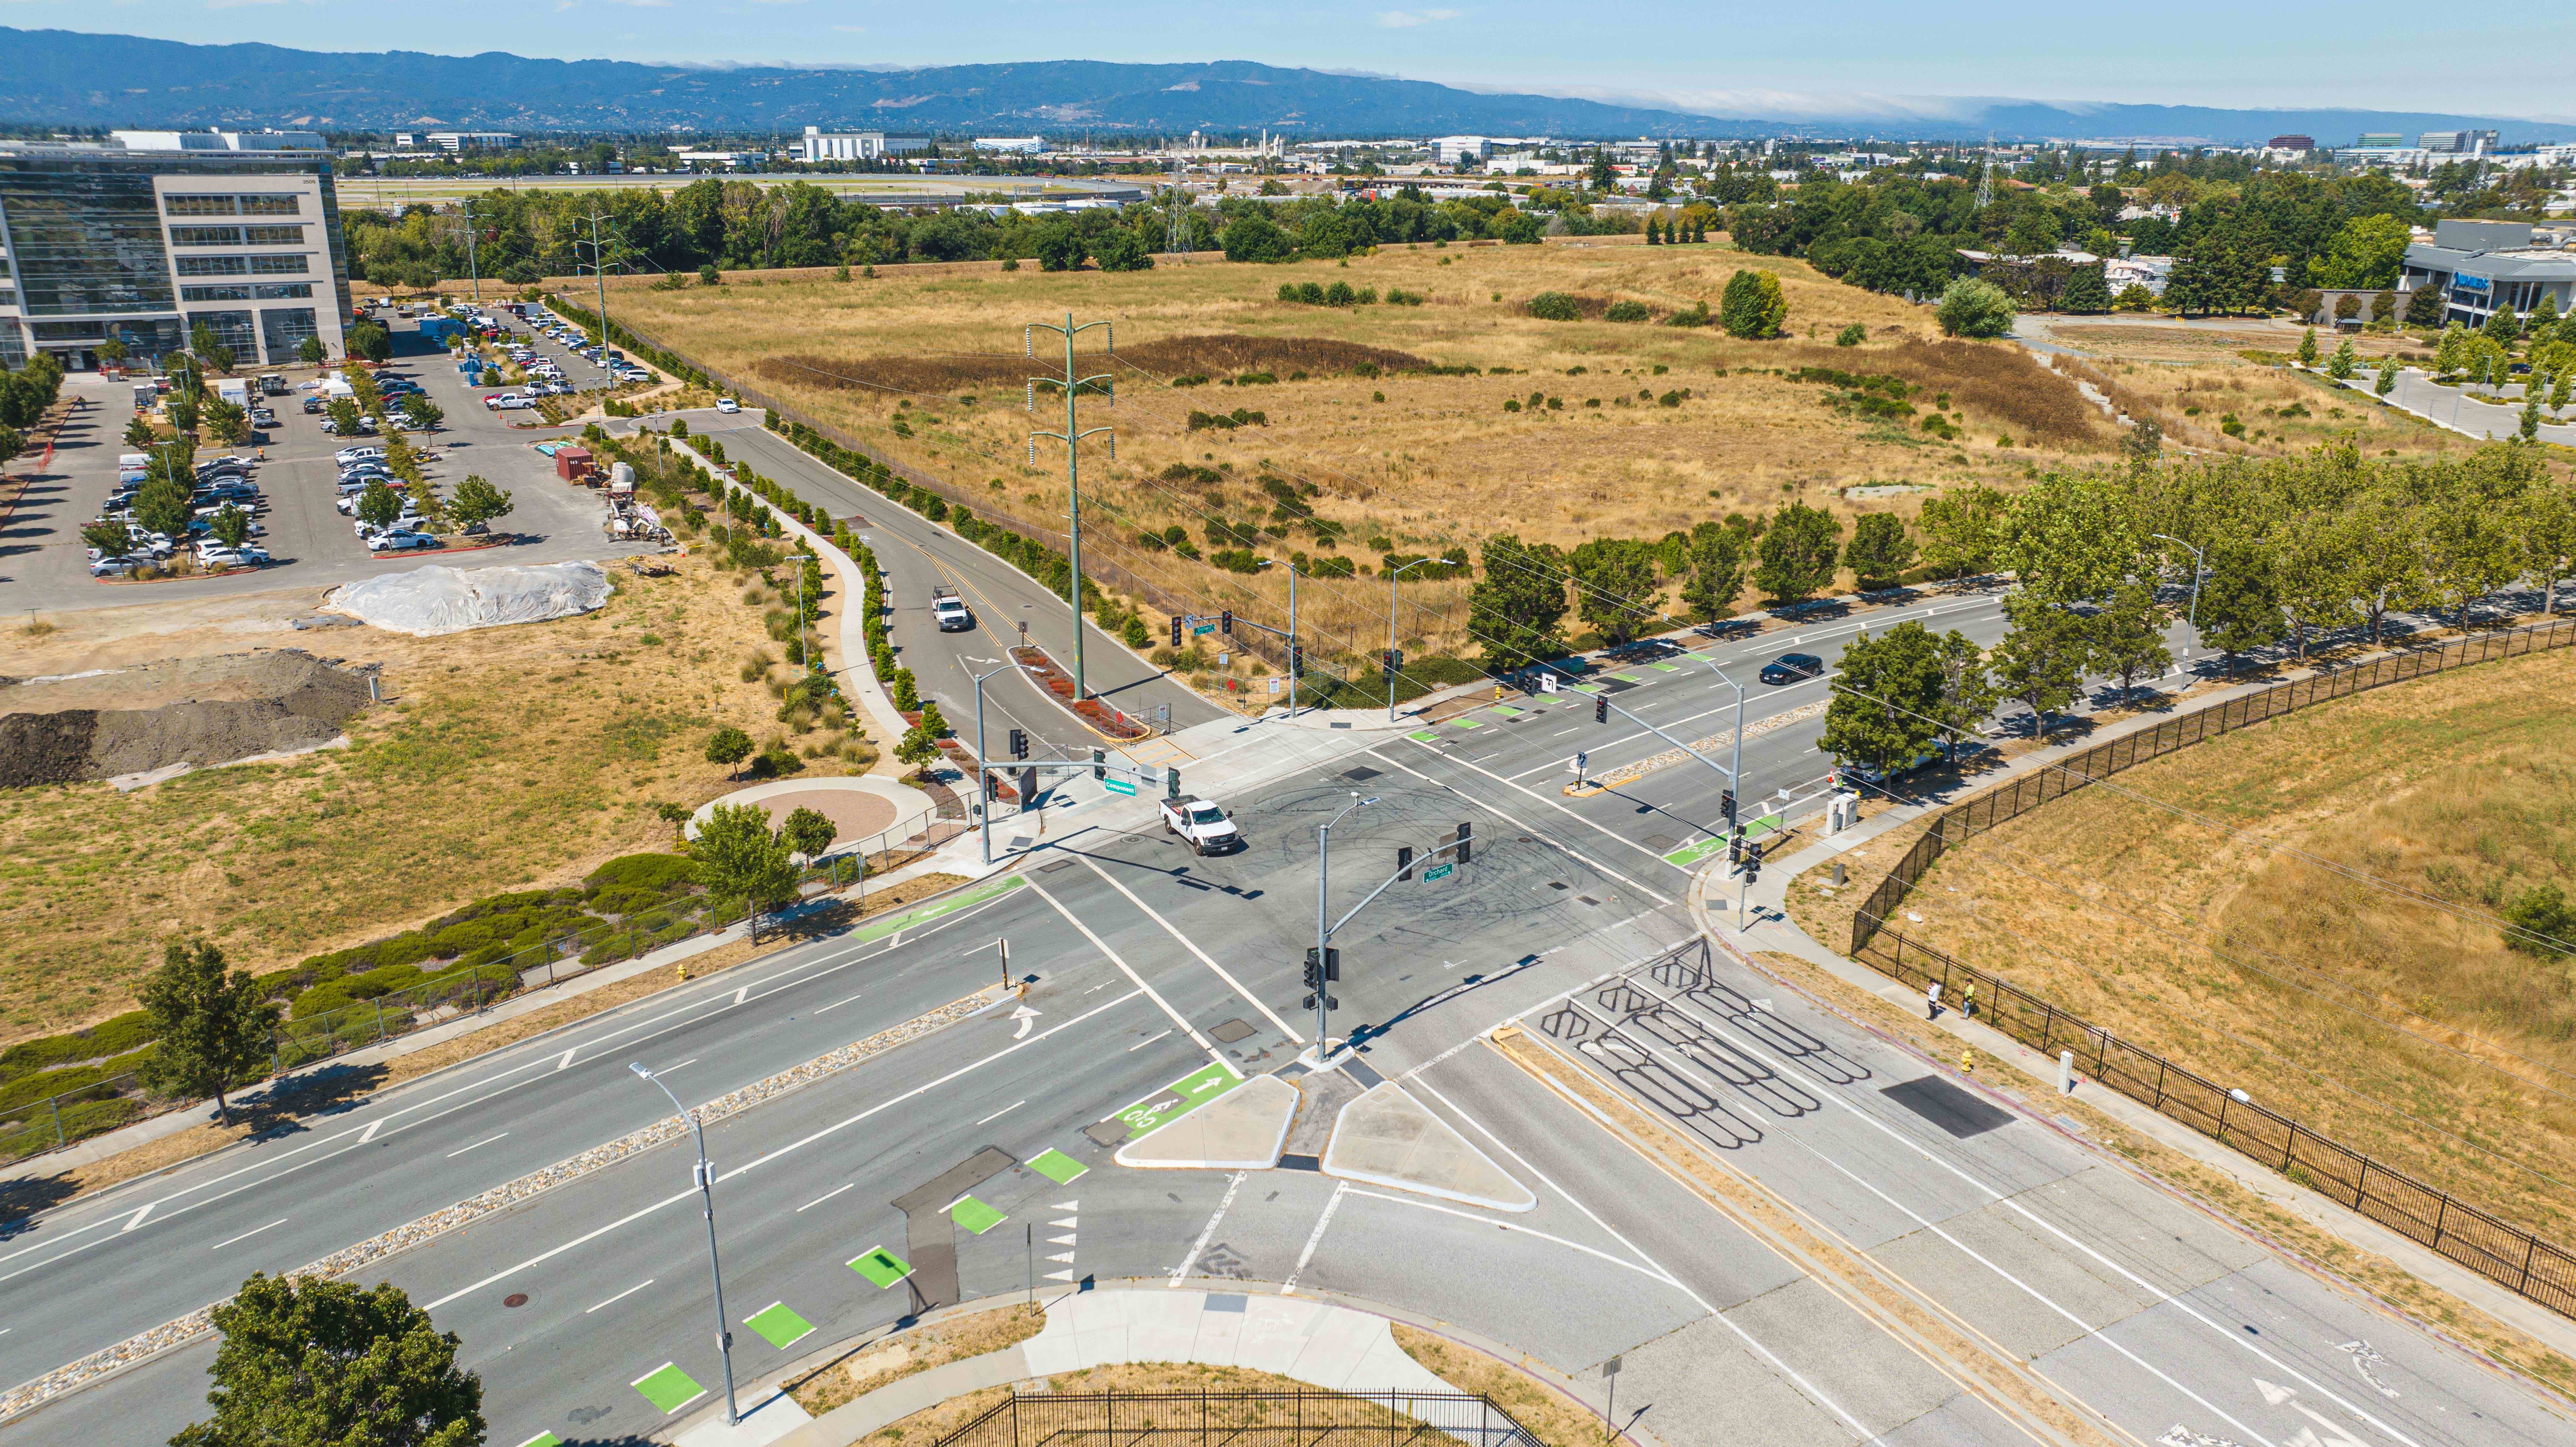 Read: San Jose Upgrades Traffic Security With ASSA ABLOY Critical Infrastructure Locks